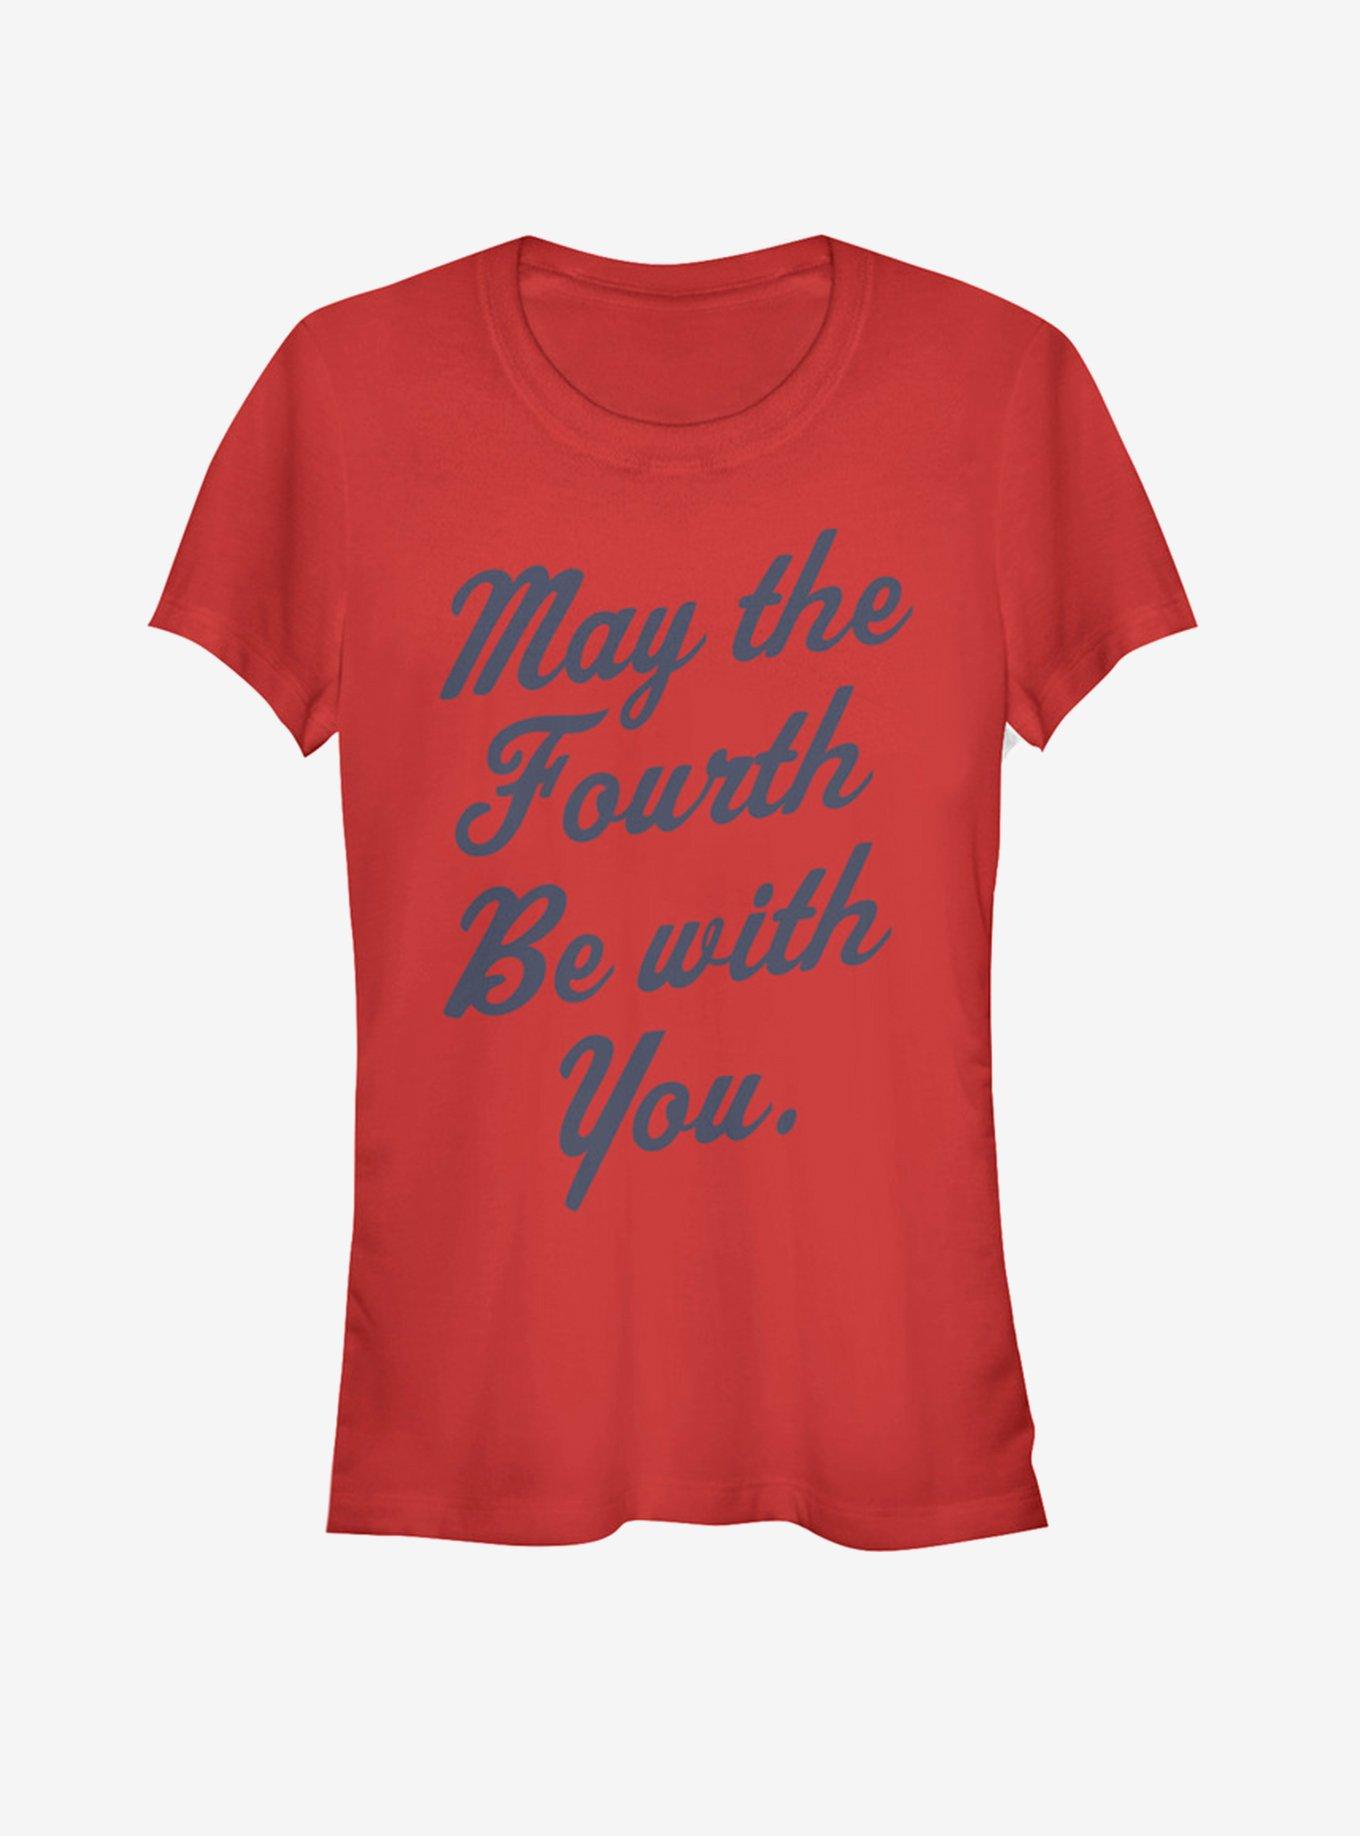 Star Wars Looking May the Fourth Girls T-Shirt, RED, hi-res